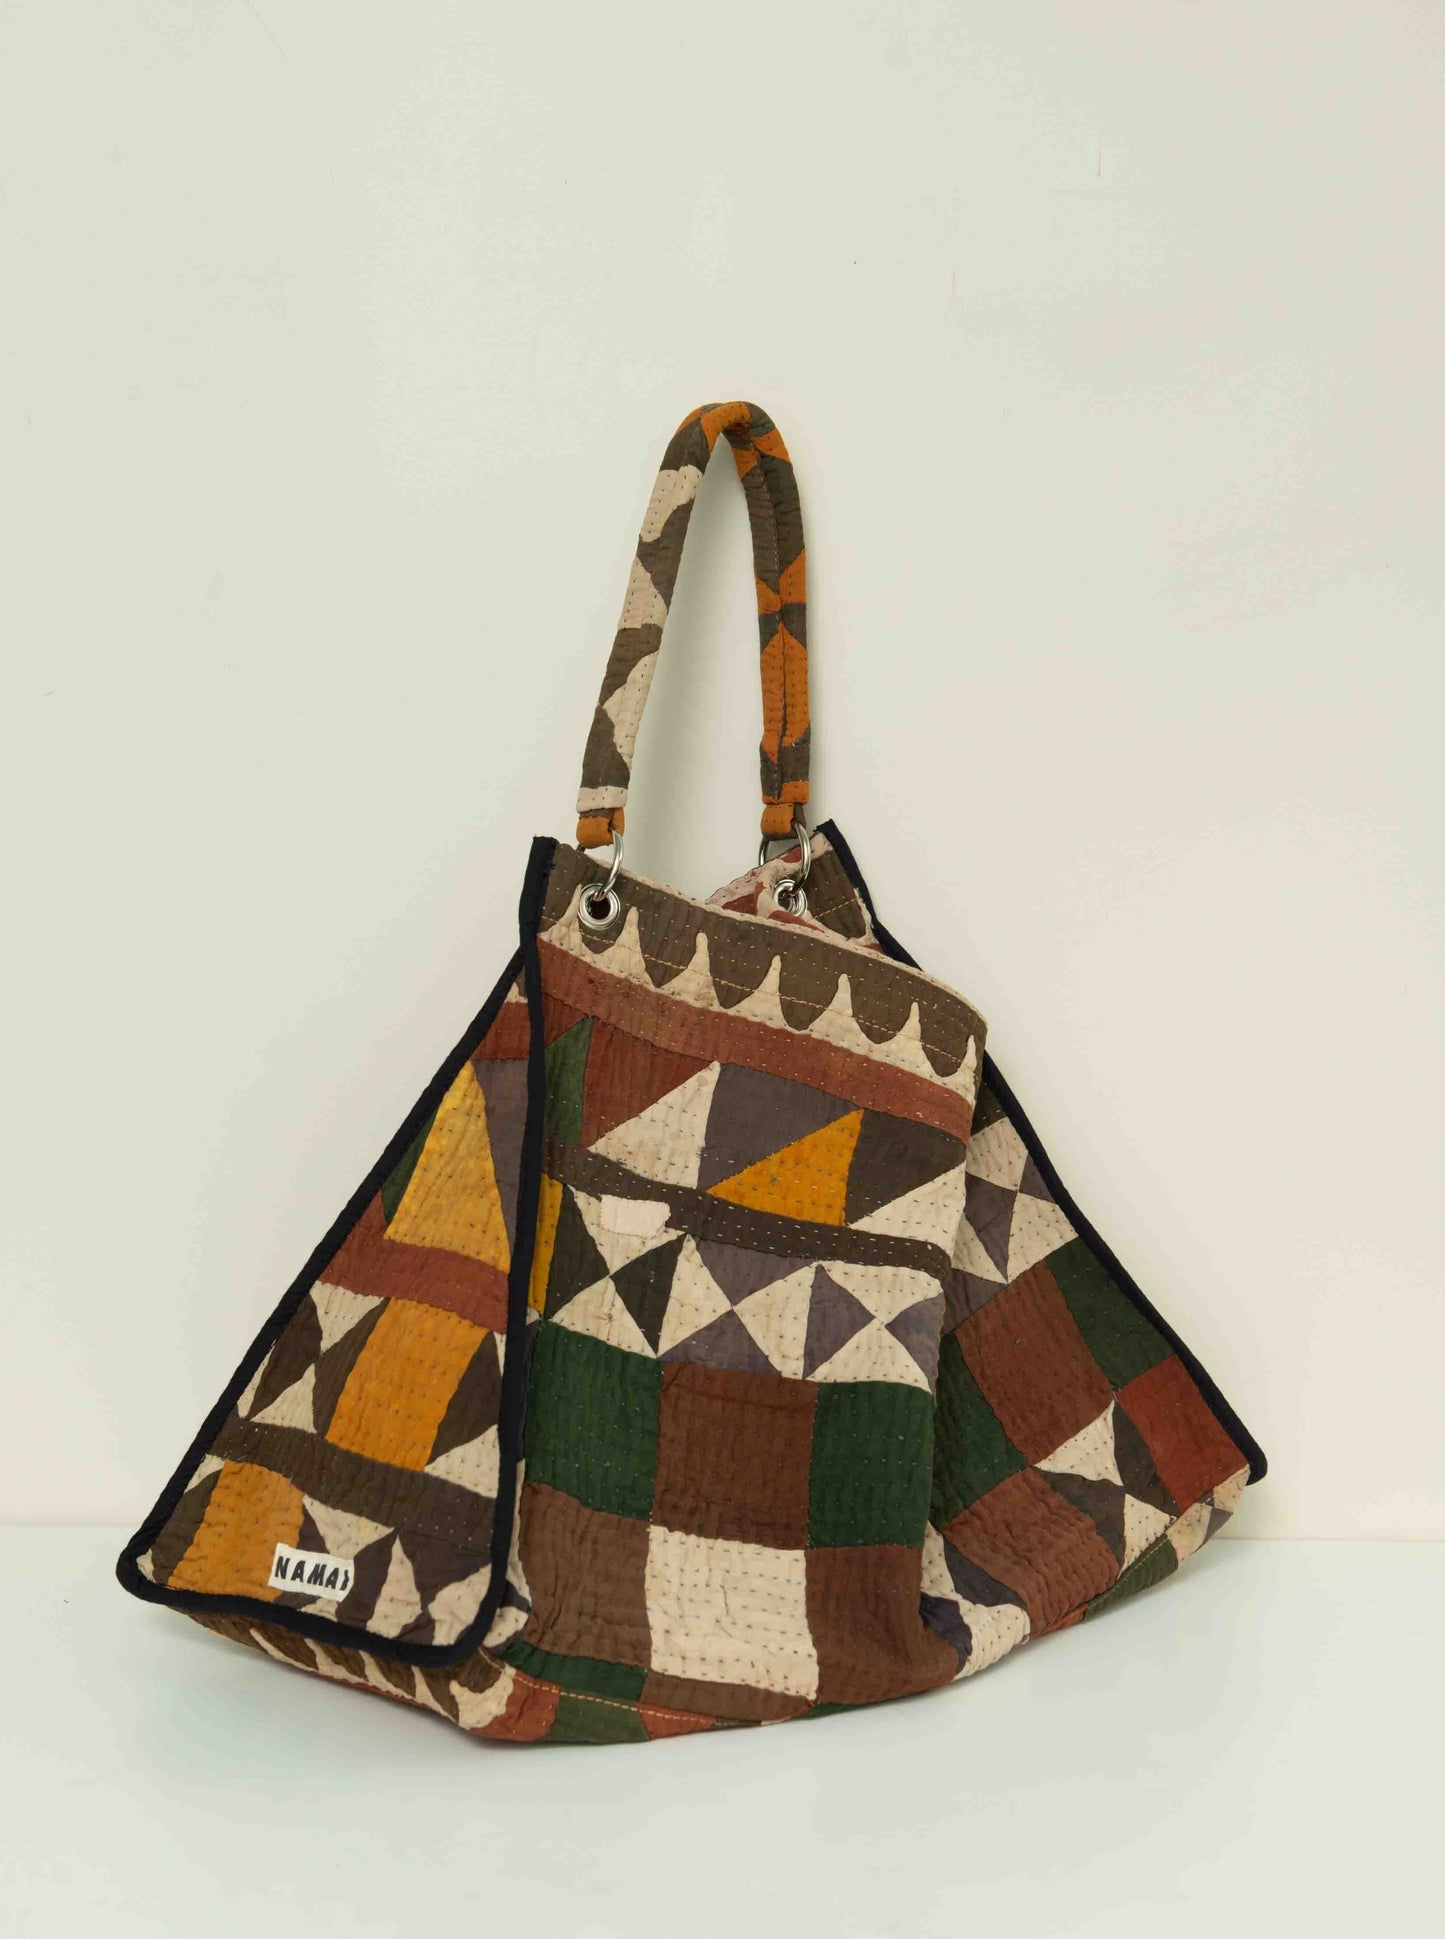 The Sakshi Ralli Quilted Shoulder Bag - Taupe and Green